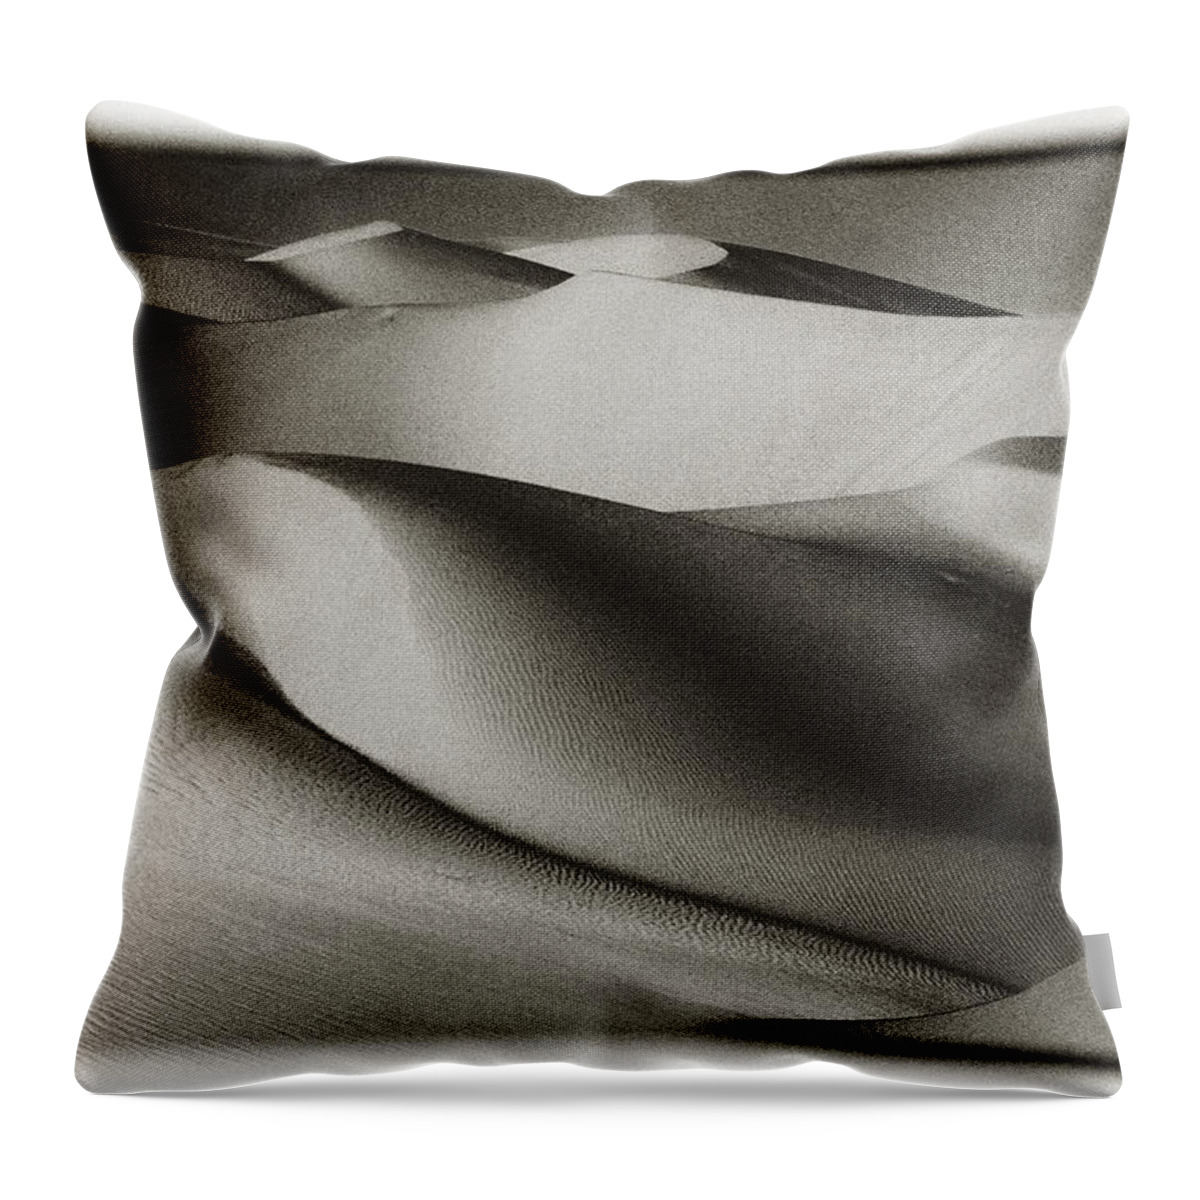 Horizontal Throw Pillow featuring the photograph Graphic Dunes - 291 by Paul W Faust - Impressions of Light